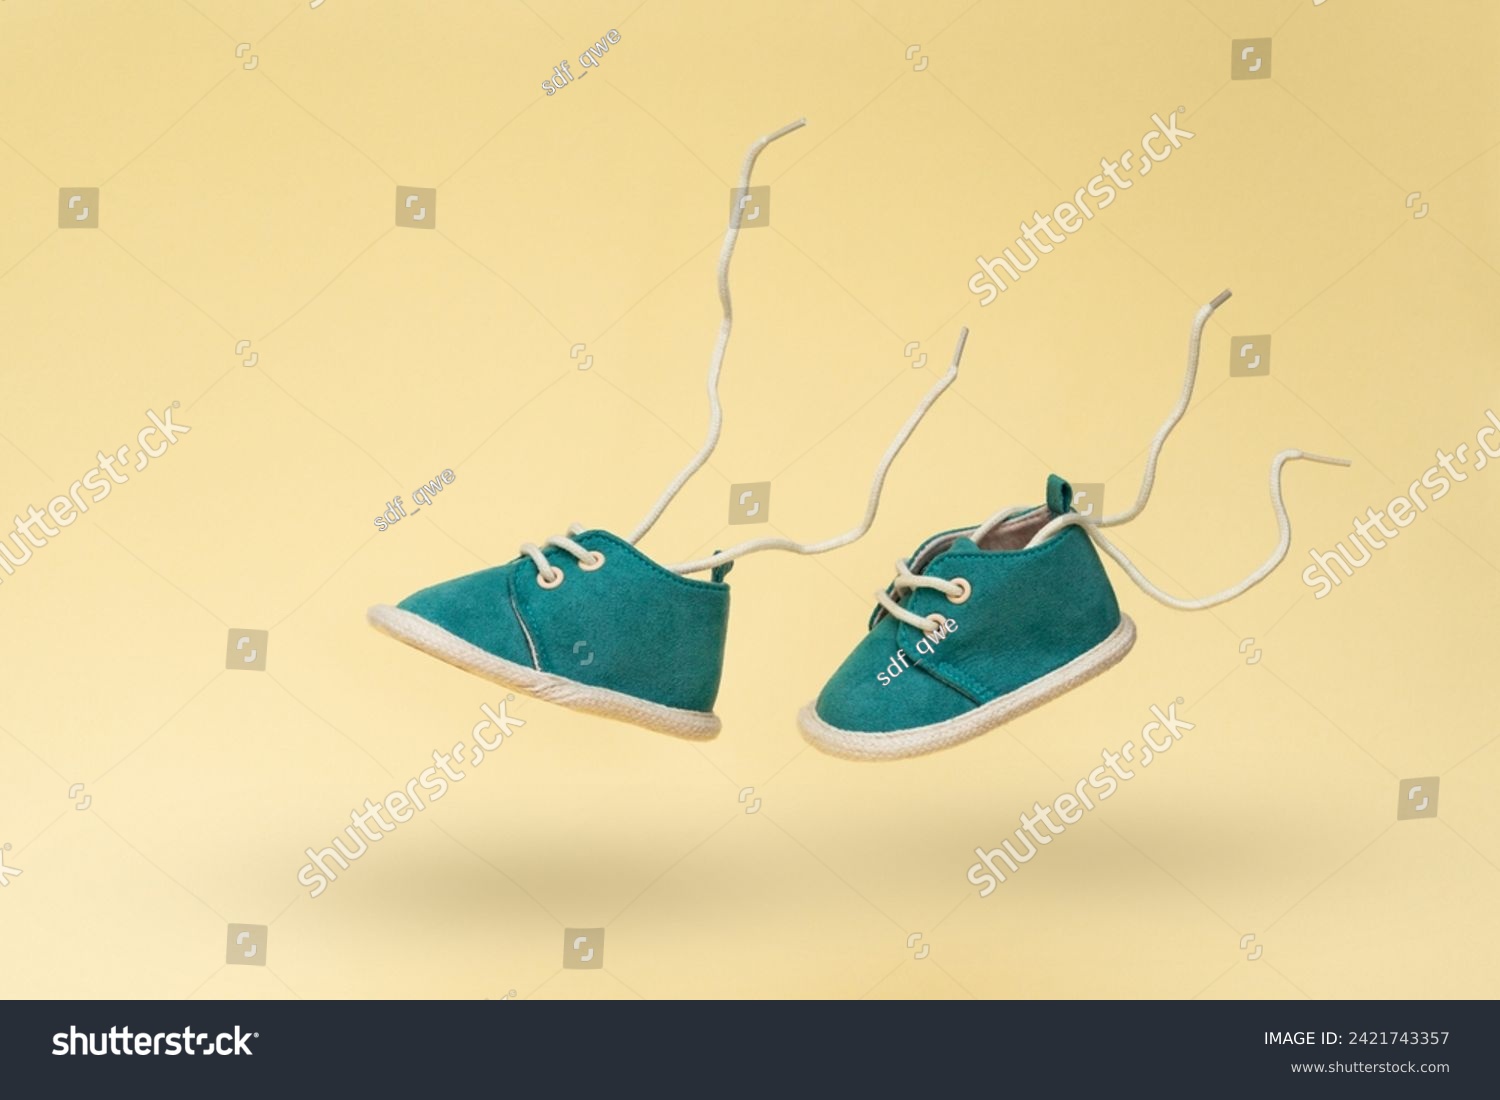 Flying baby shoes with flying laces on yellow background. Newborn baby concept with levitation effect and copy space #2421743357